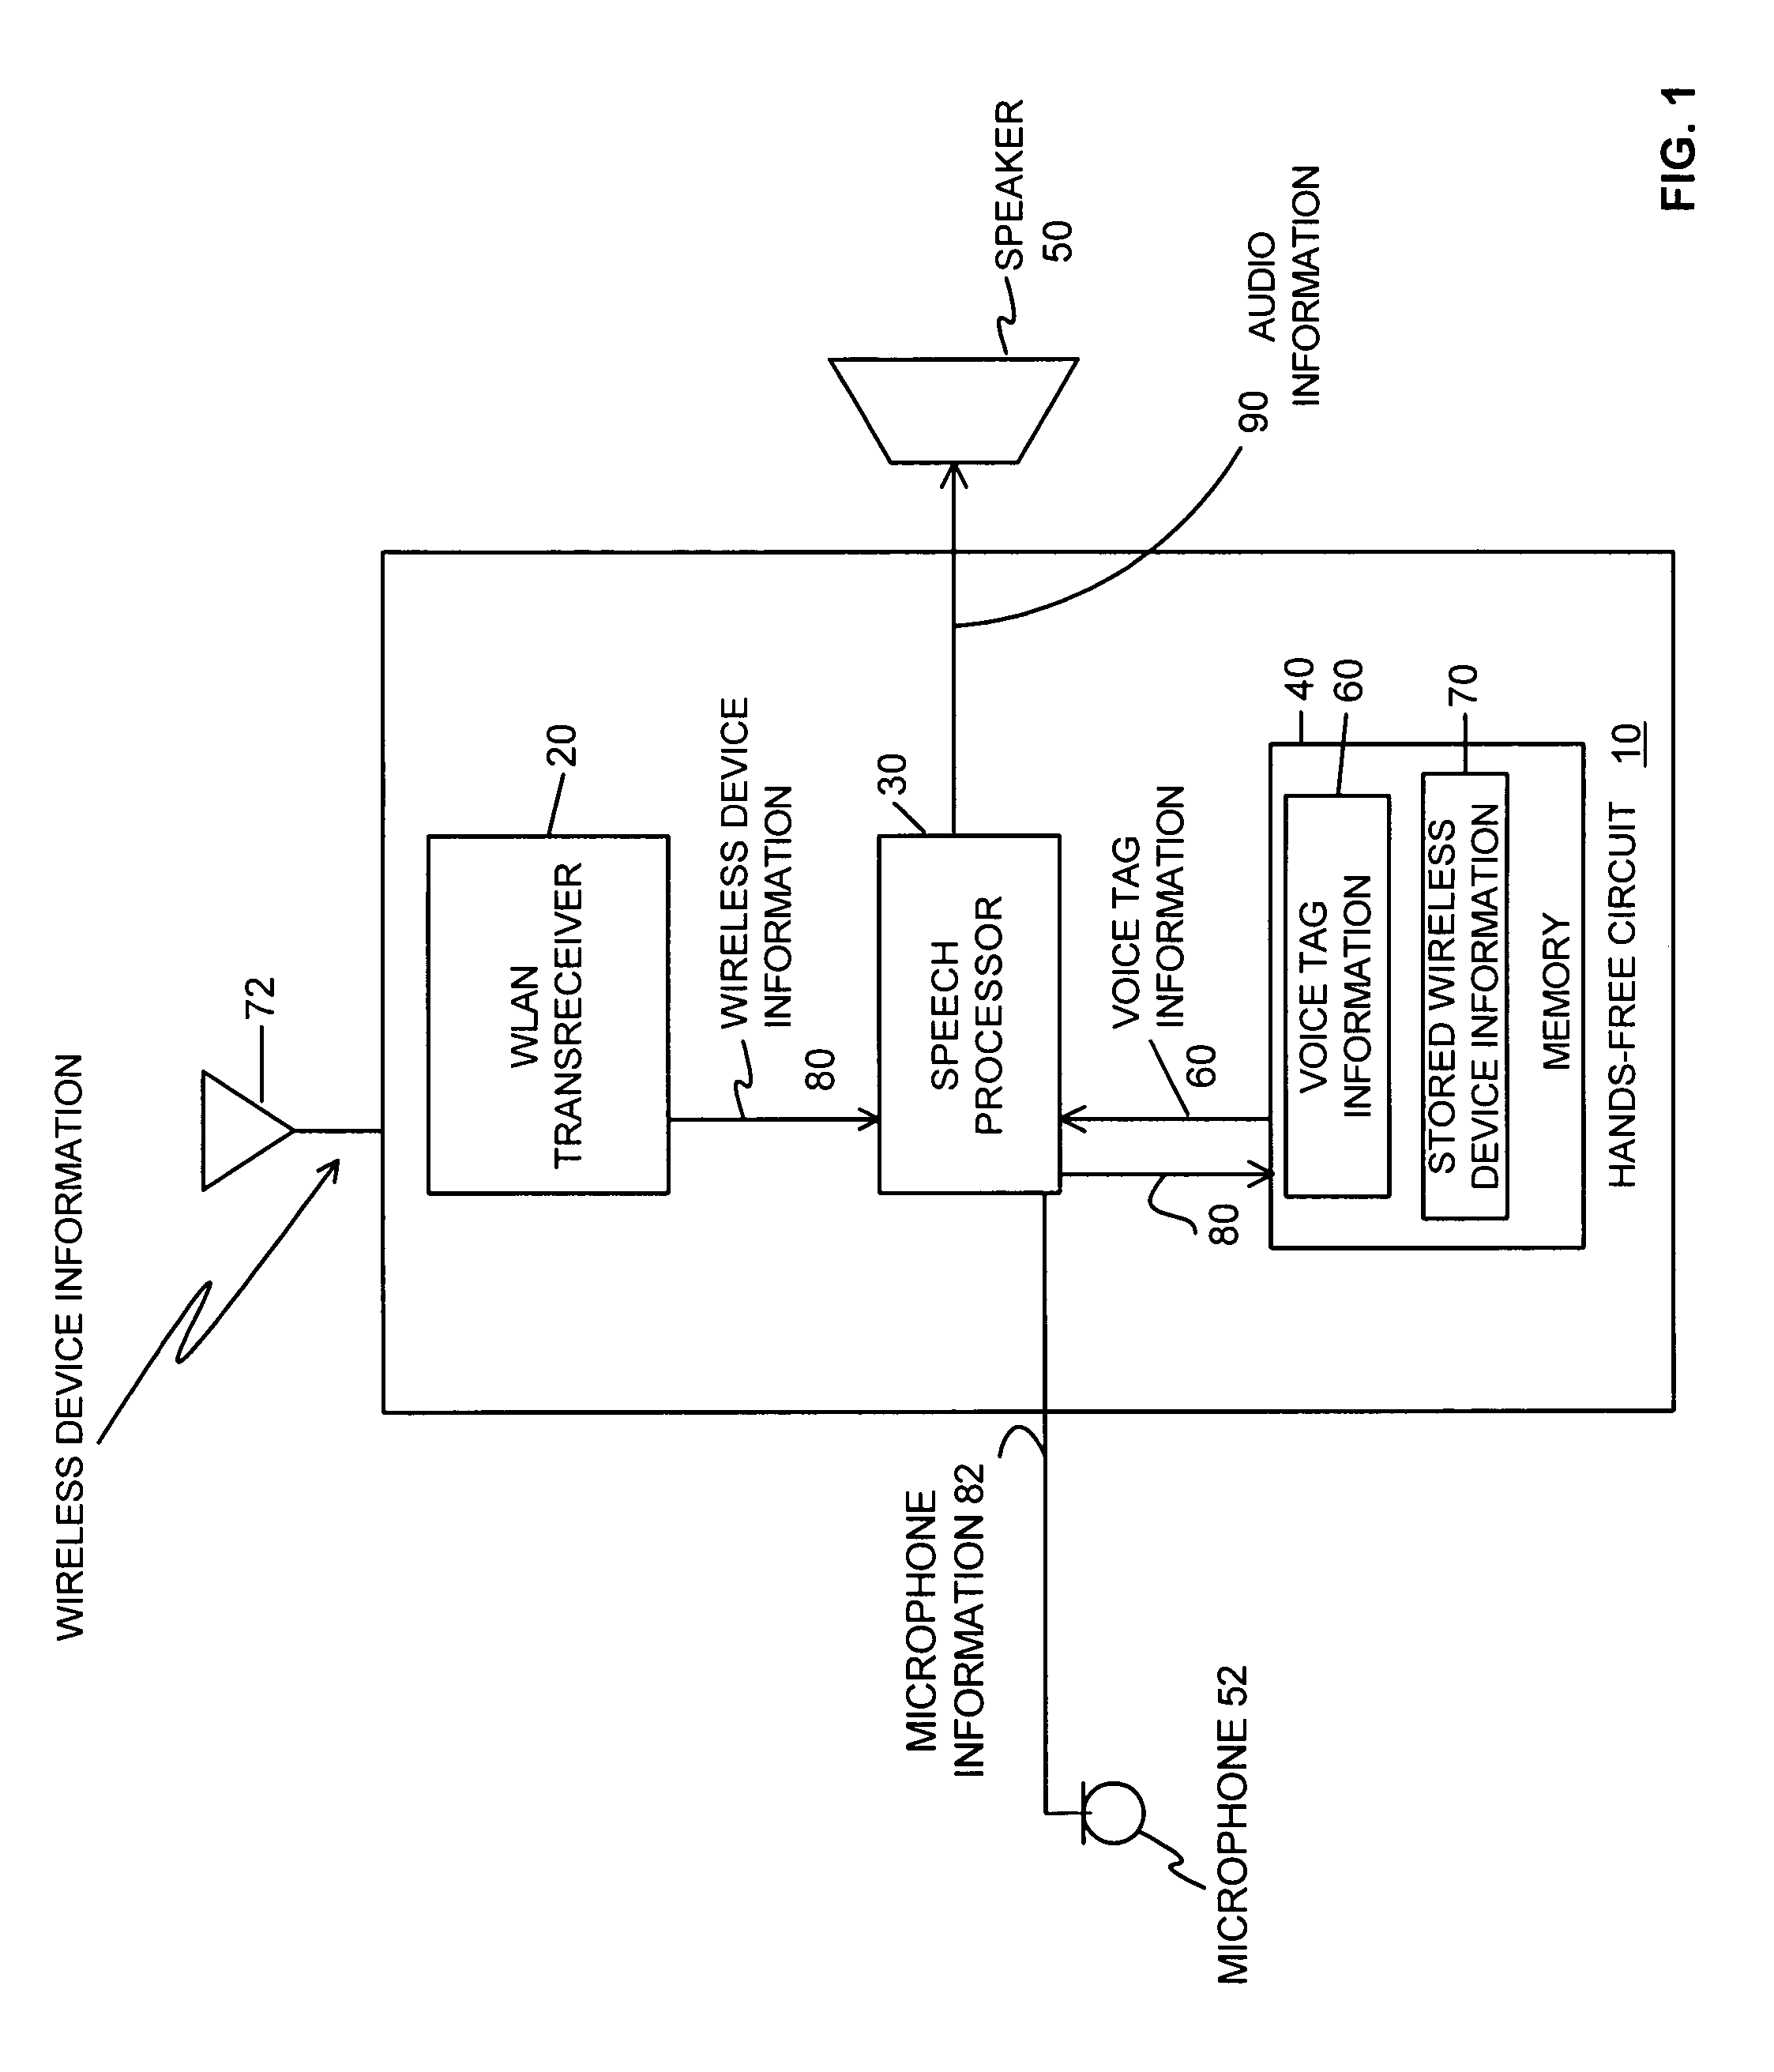 Hands-free circuit and method for communicating with a wireless device